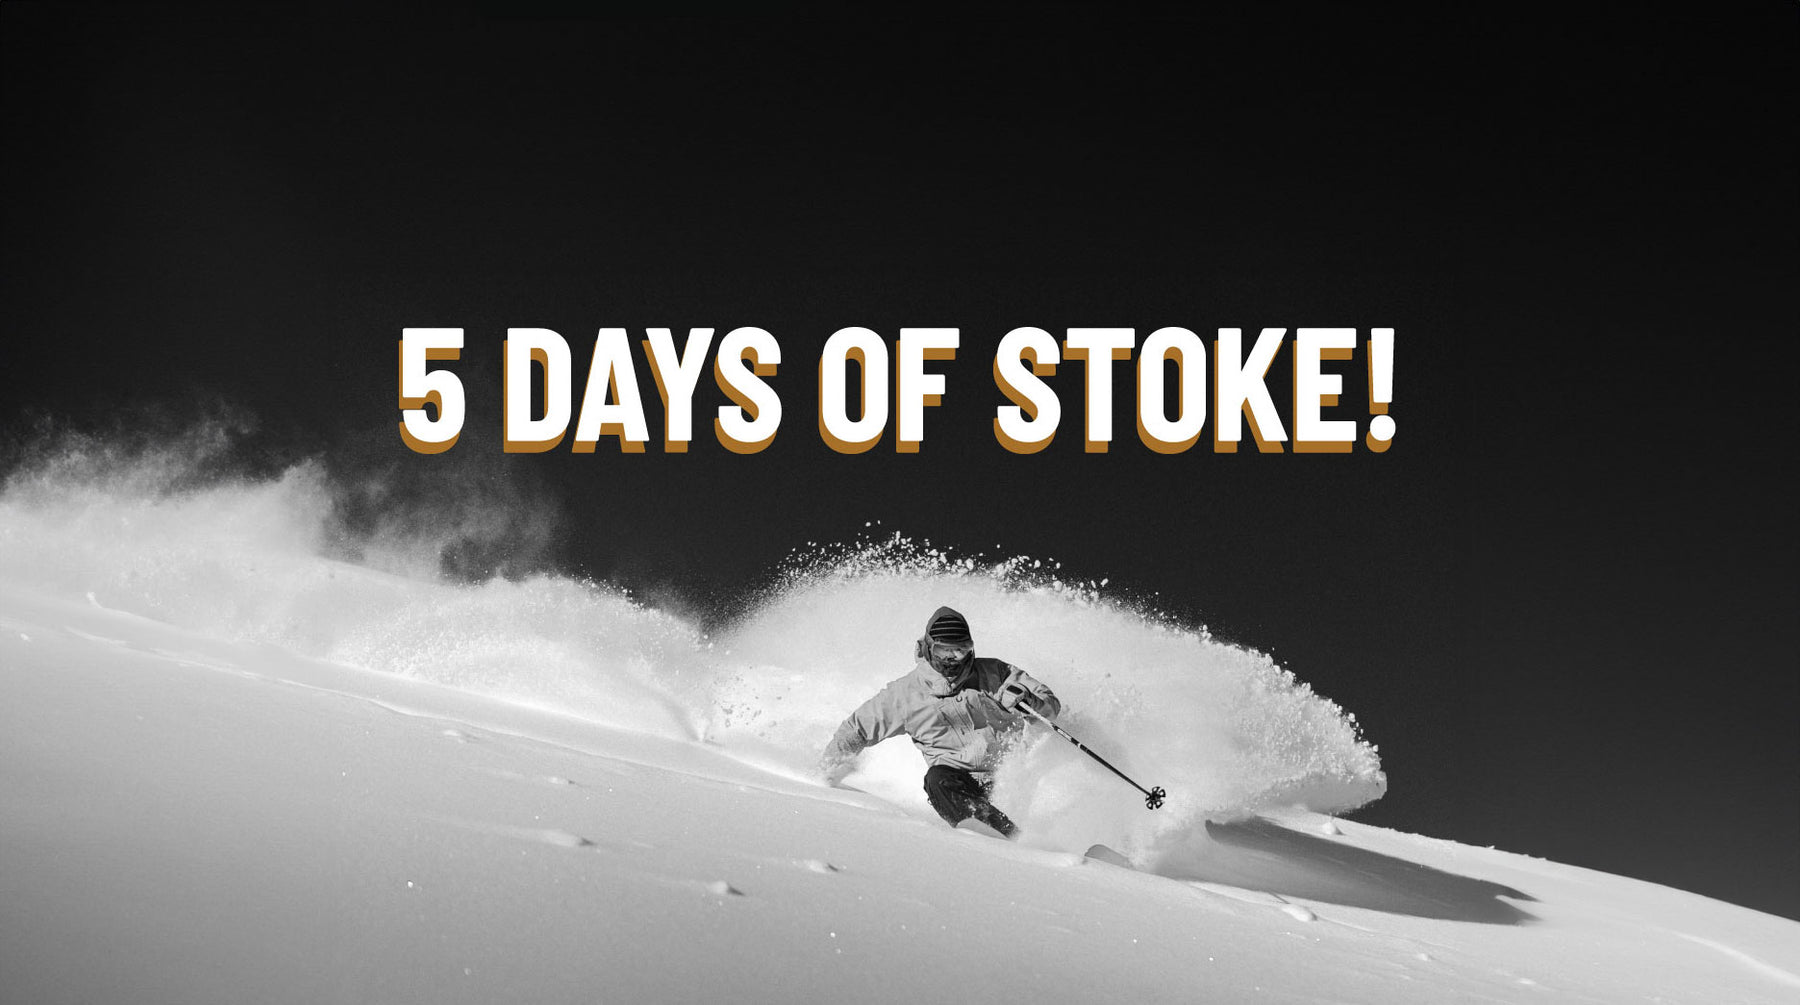 INTRODUCING: 5 DAYS OF STOKE!